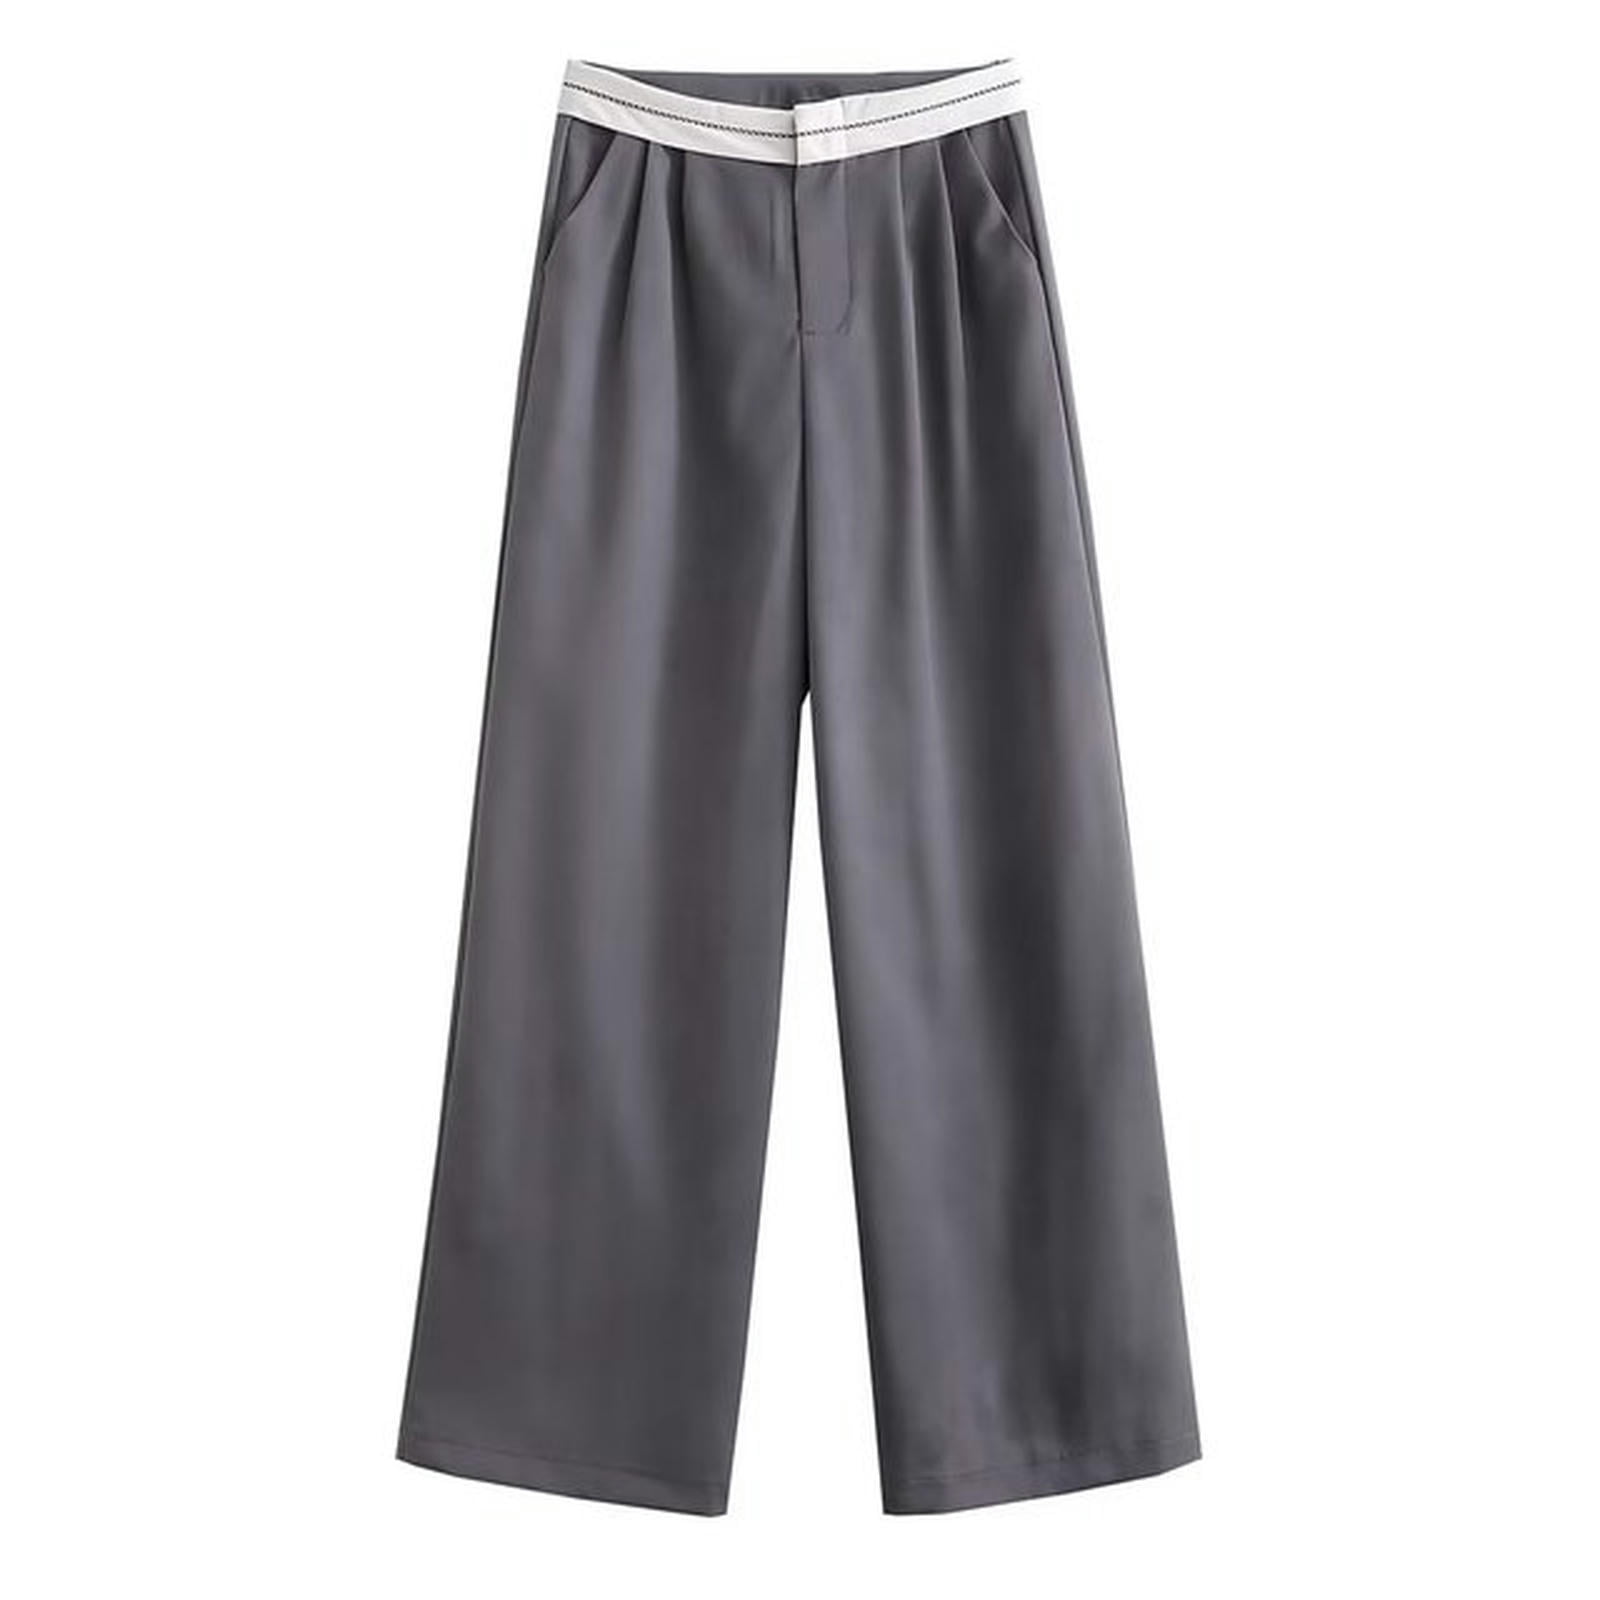 Black Wide Leg Pants with Contrast Waist Women Stright Trousers Casual ...